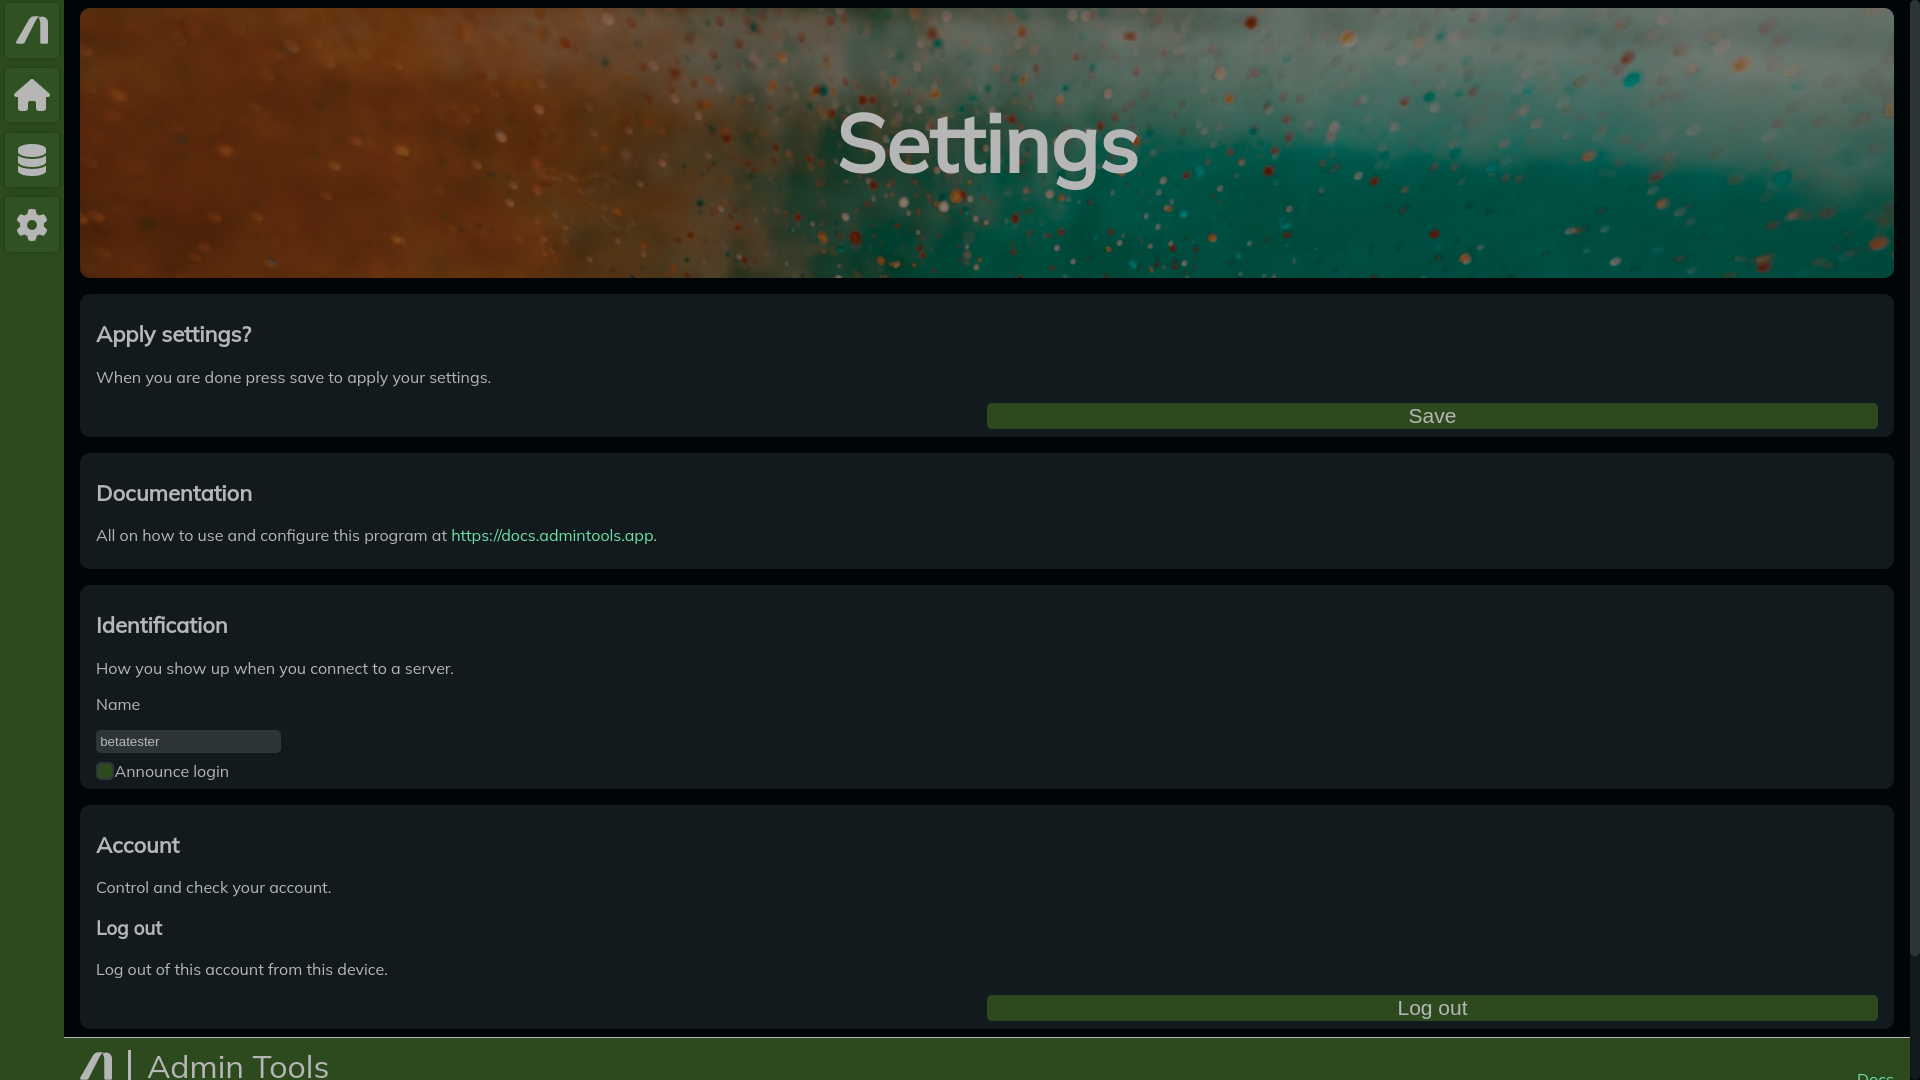 AdminTools settings page.